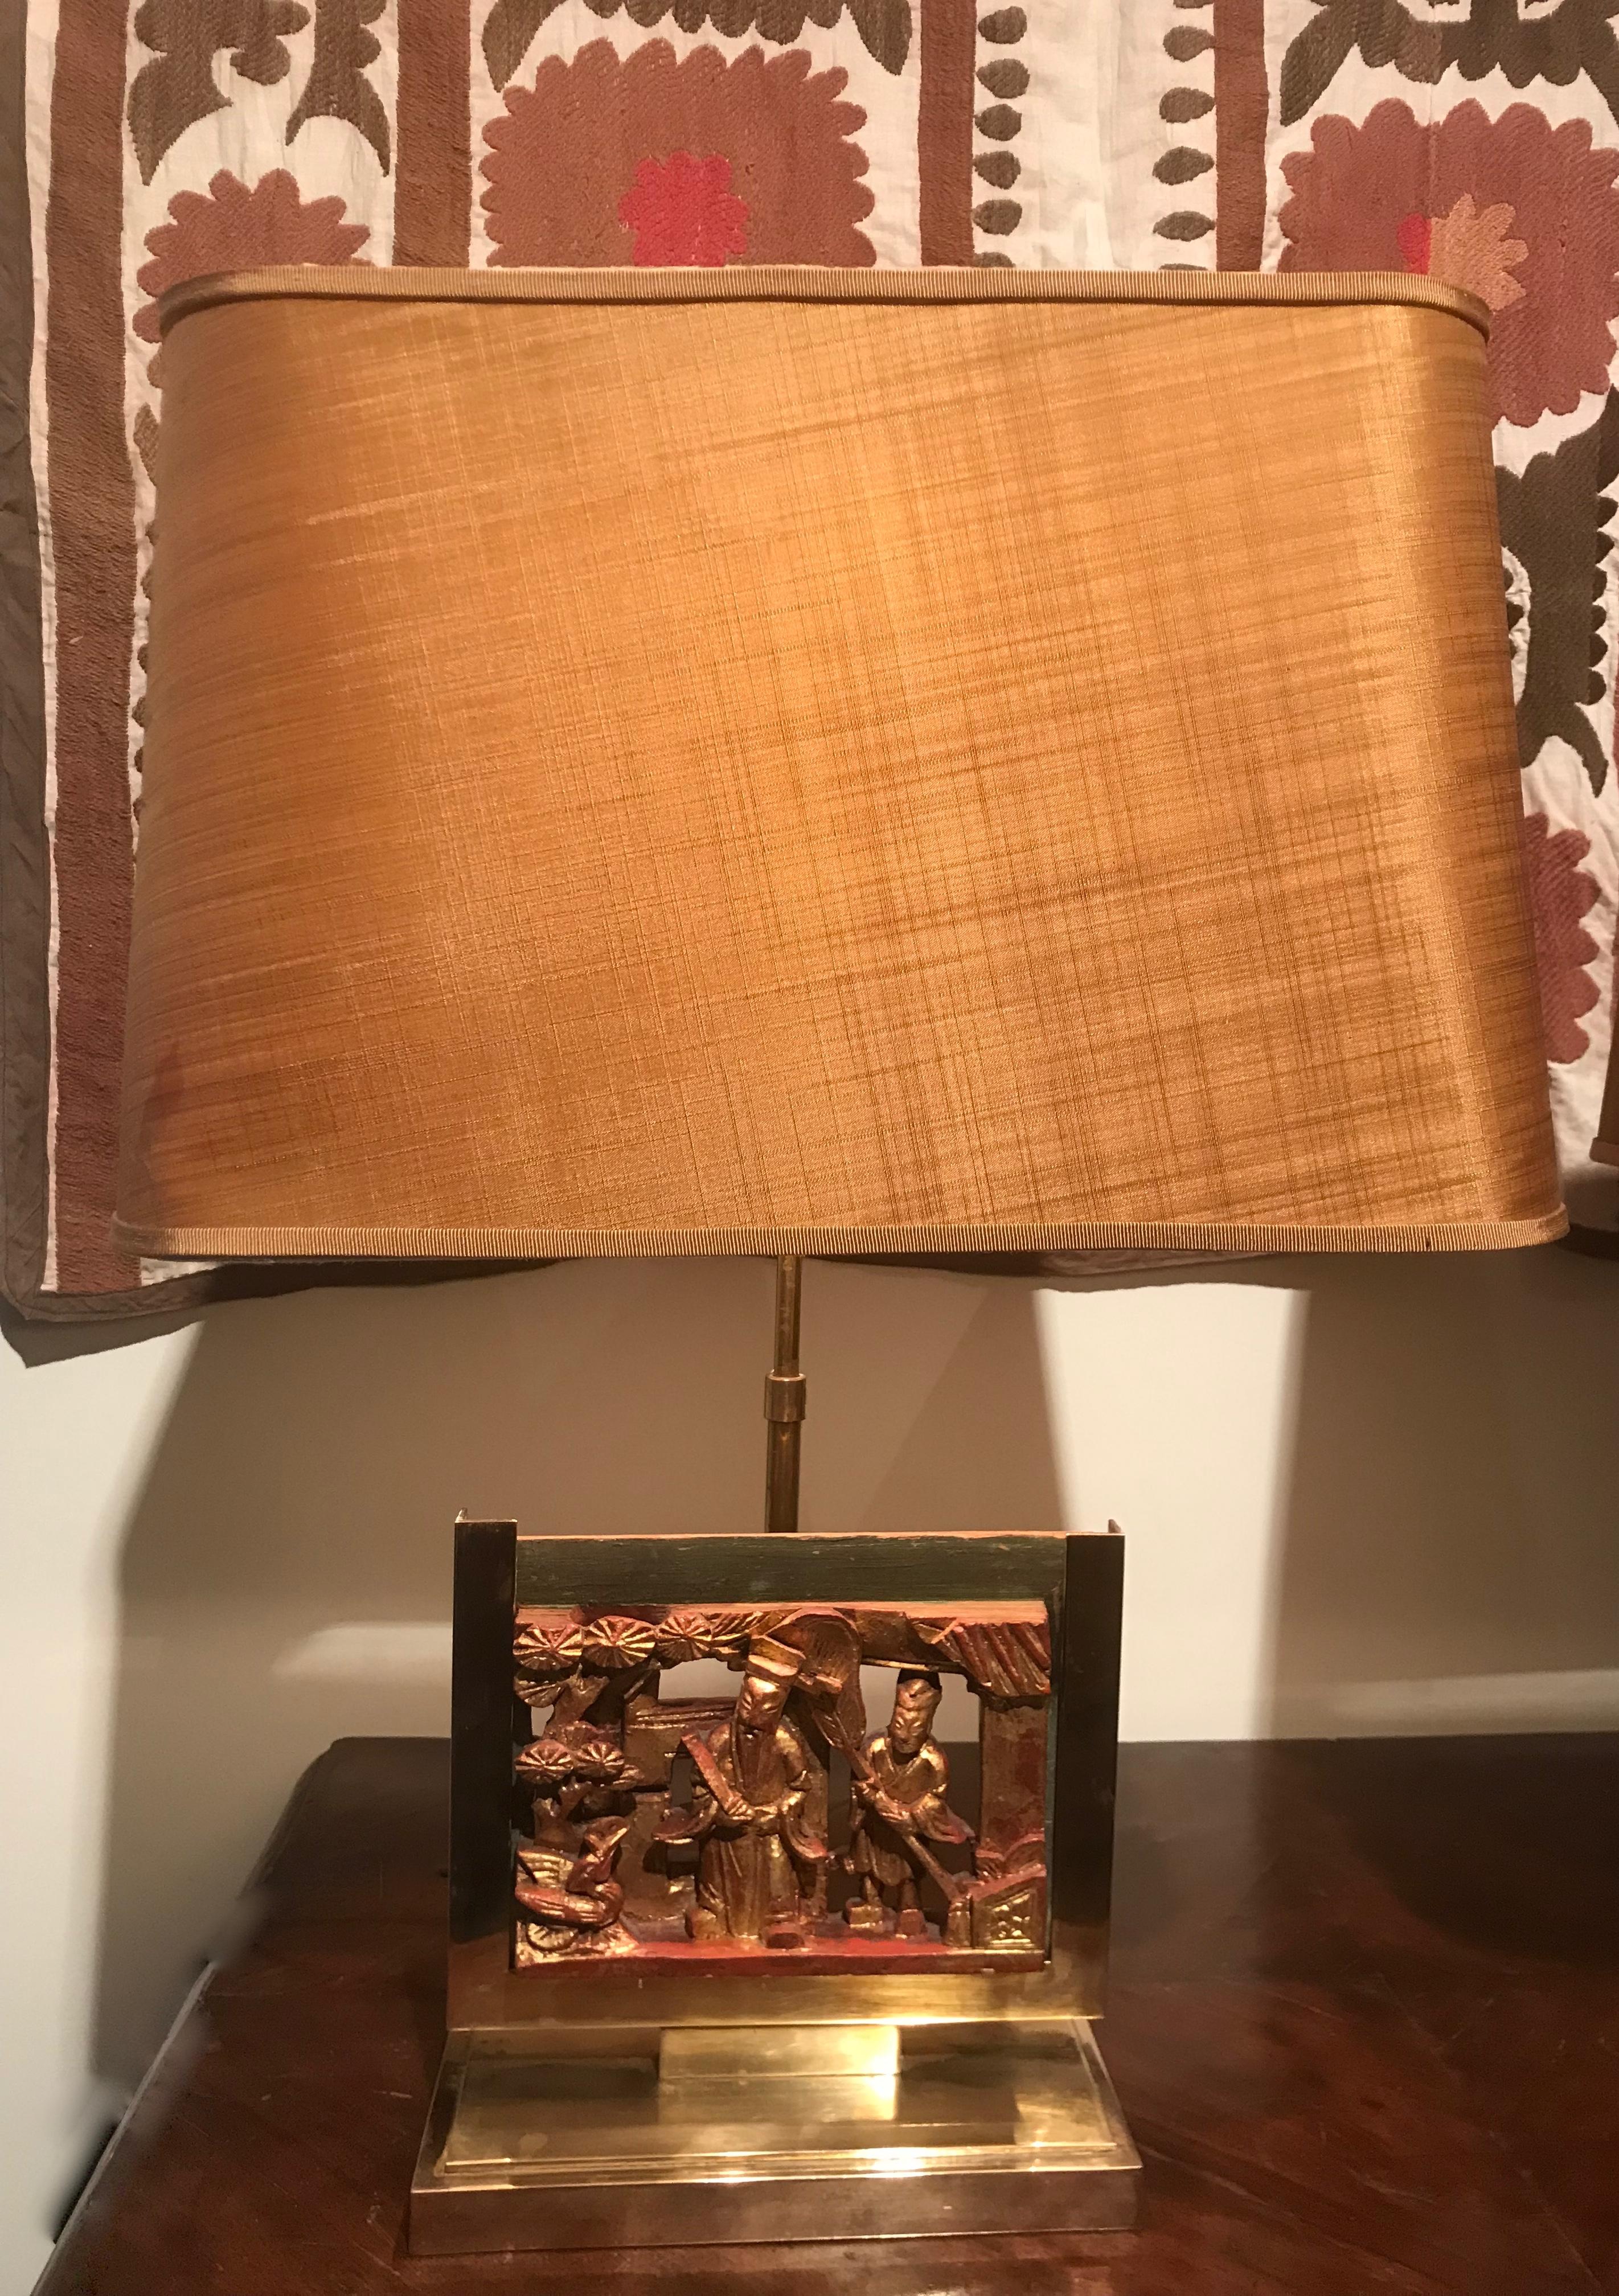 Pair of Midcentury Mod Brass Lamps with 19th Century Chinese Carved Wood Panels (Moderne der Mitte des Jahrhunderts)